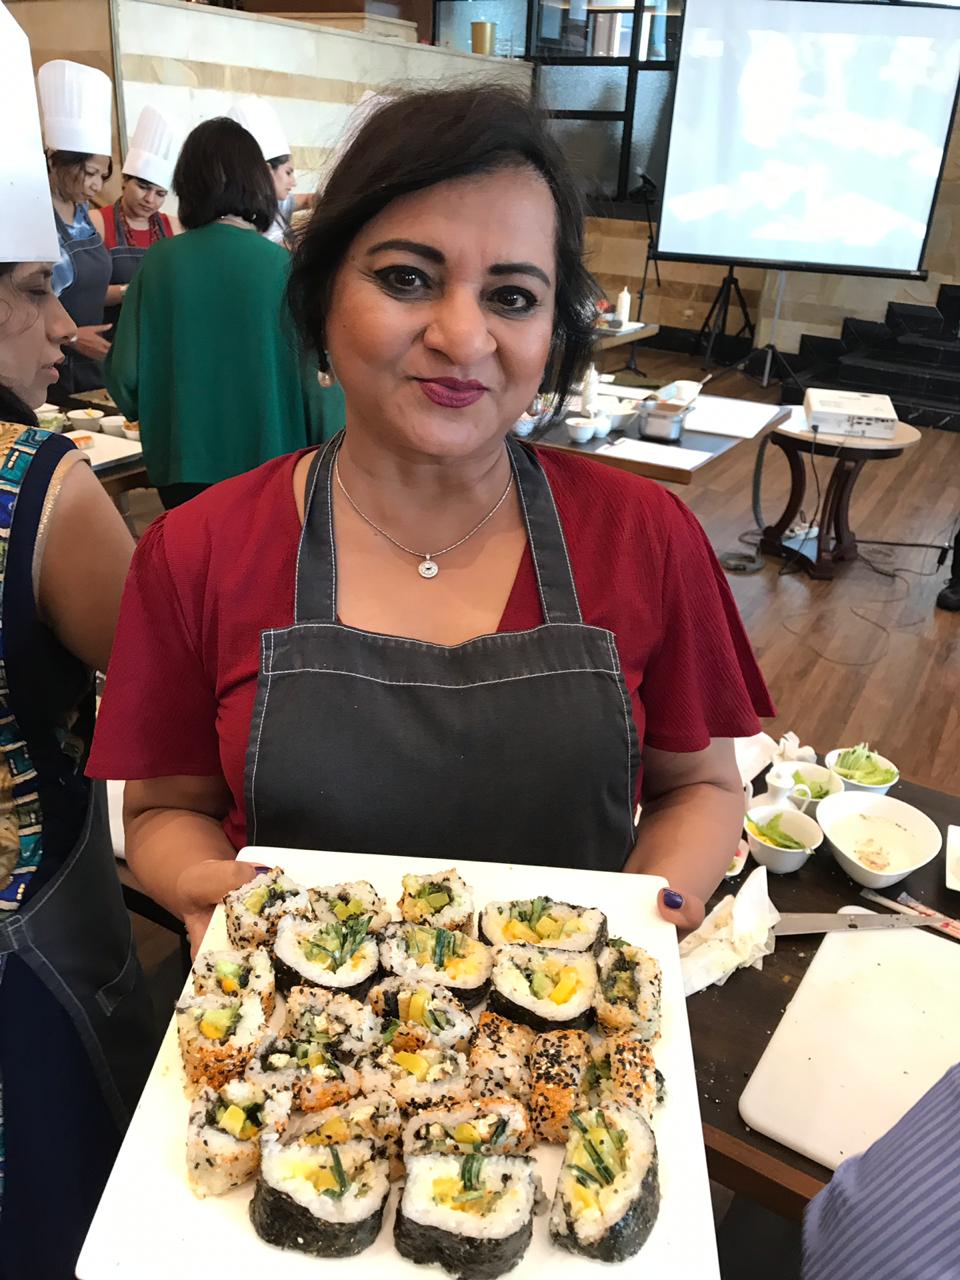 Meenu Baldwa with the sushi she made at the workshop